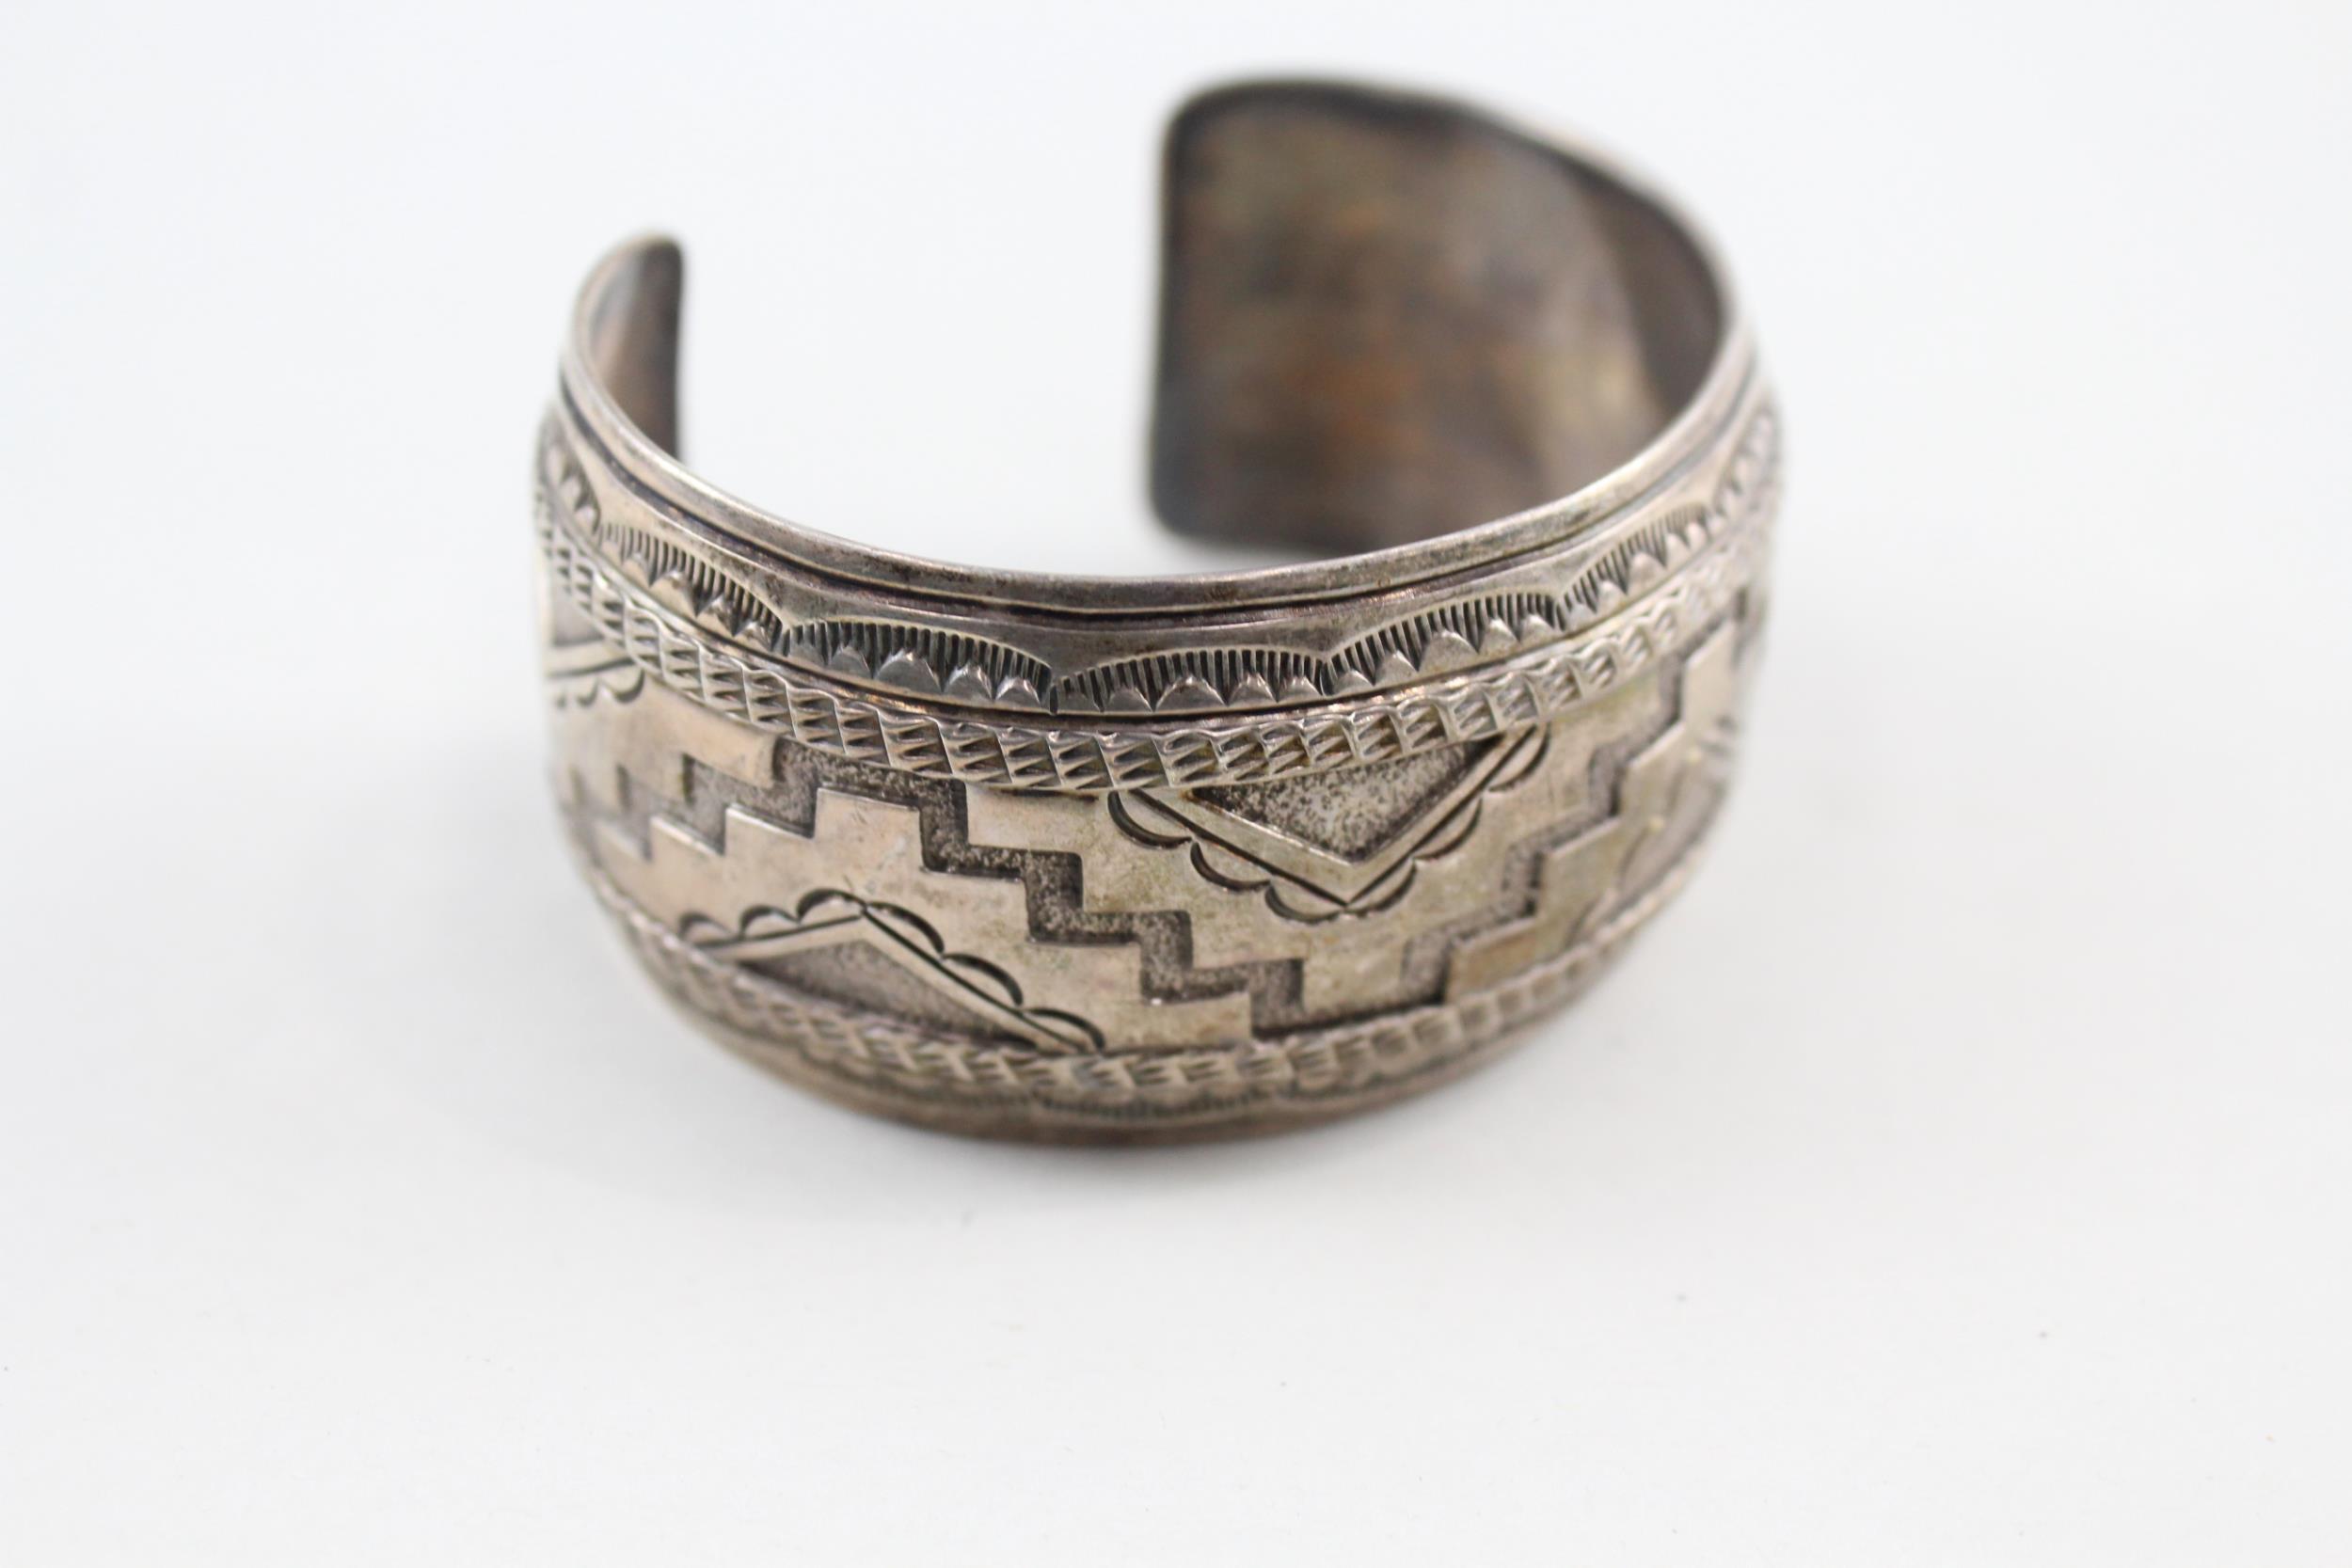 Silver Navajo bangle signed R. Wylie (55g) - Image 6 of 6